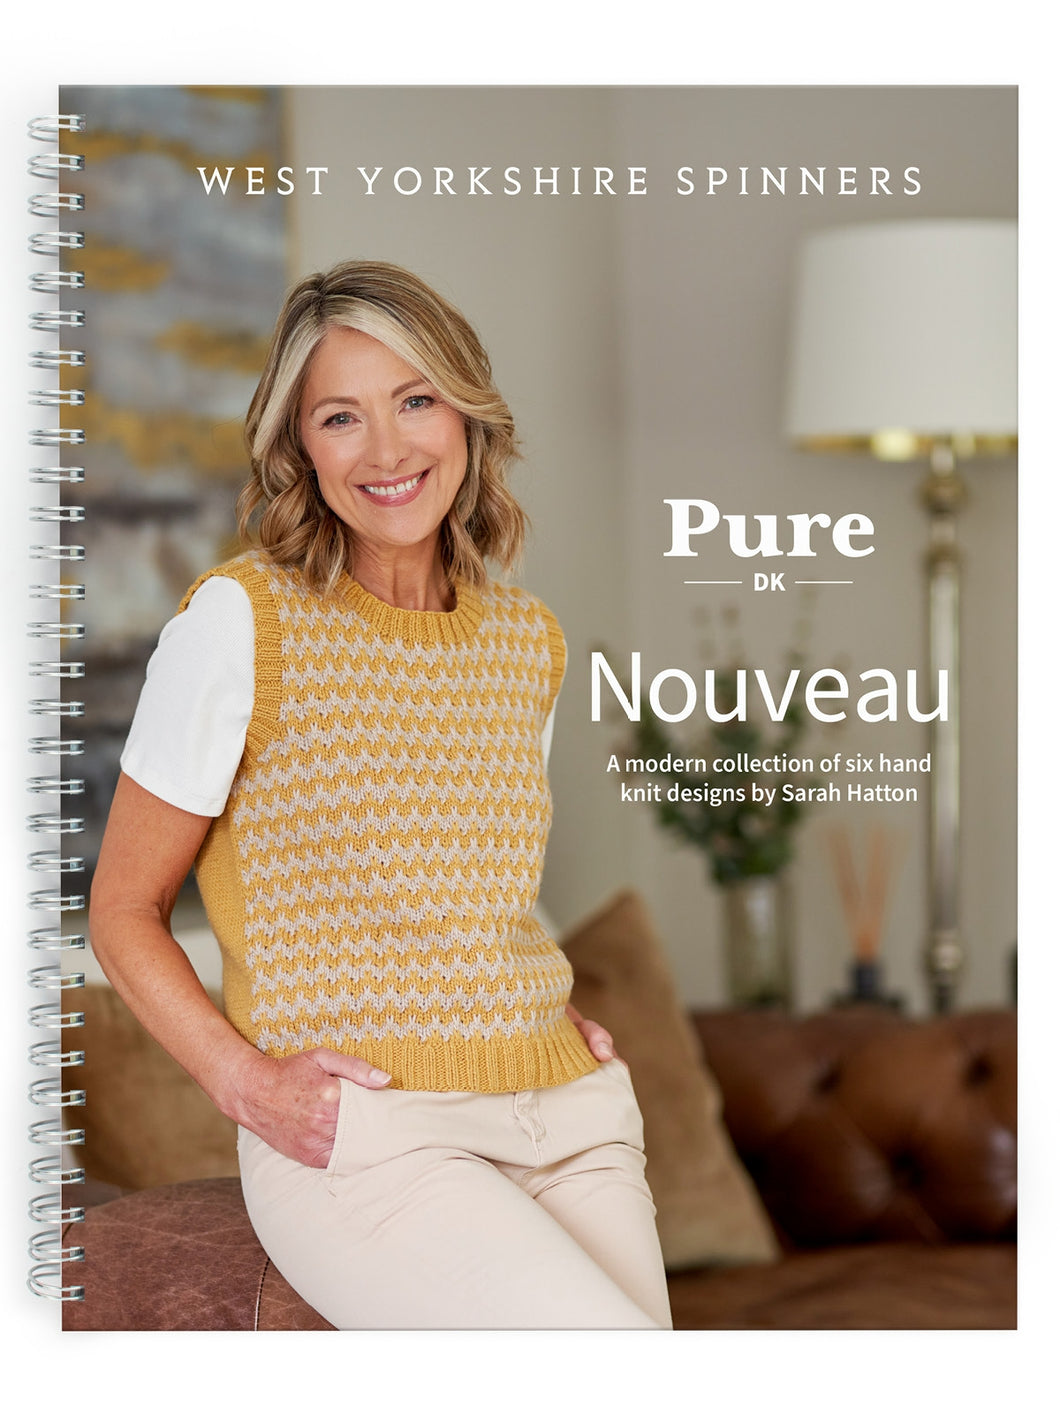 West Yorkshire Spinners - Pure DK Nouveau Pattern Collection